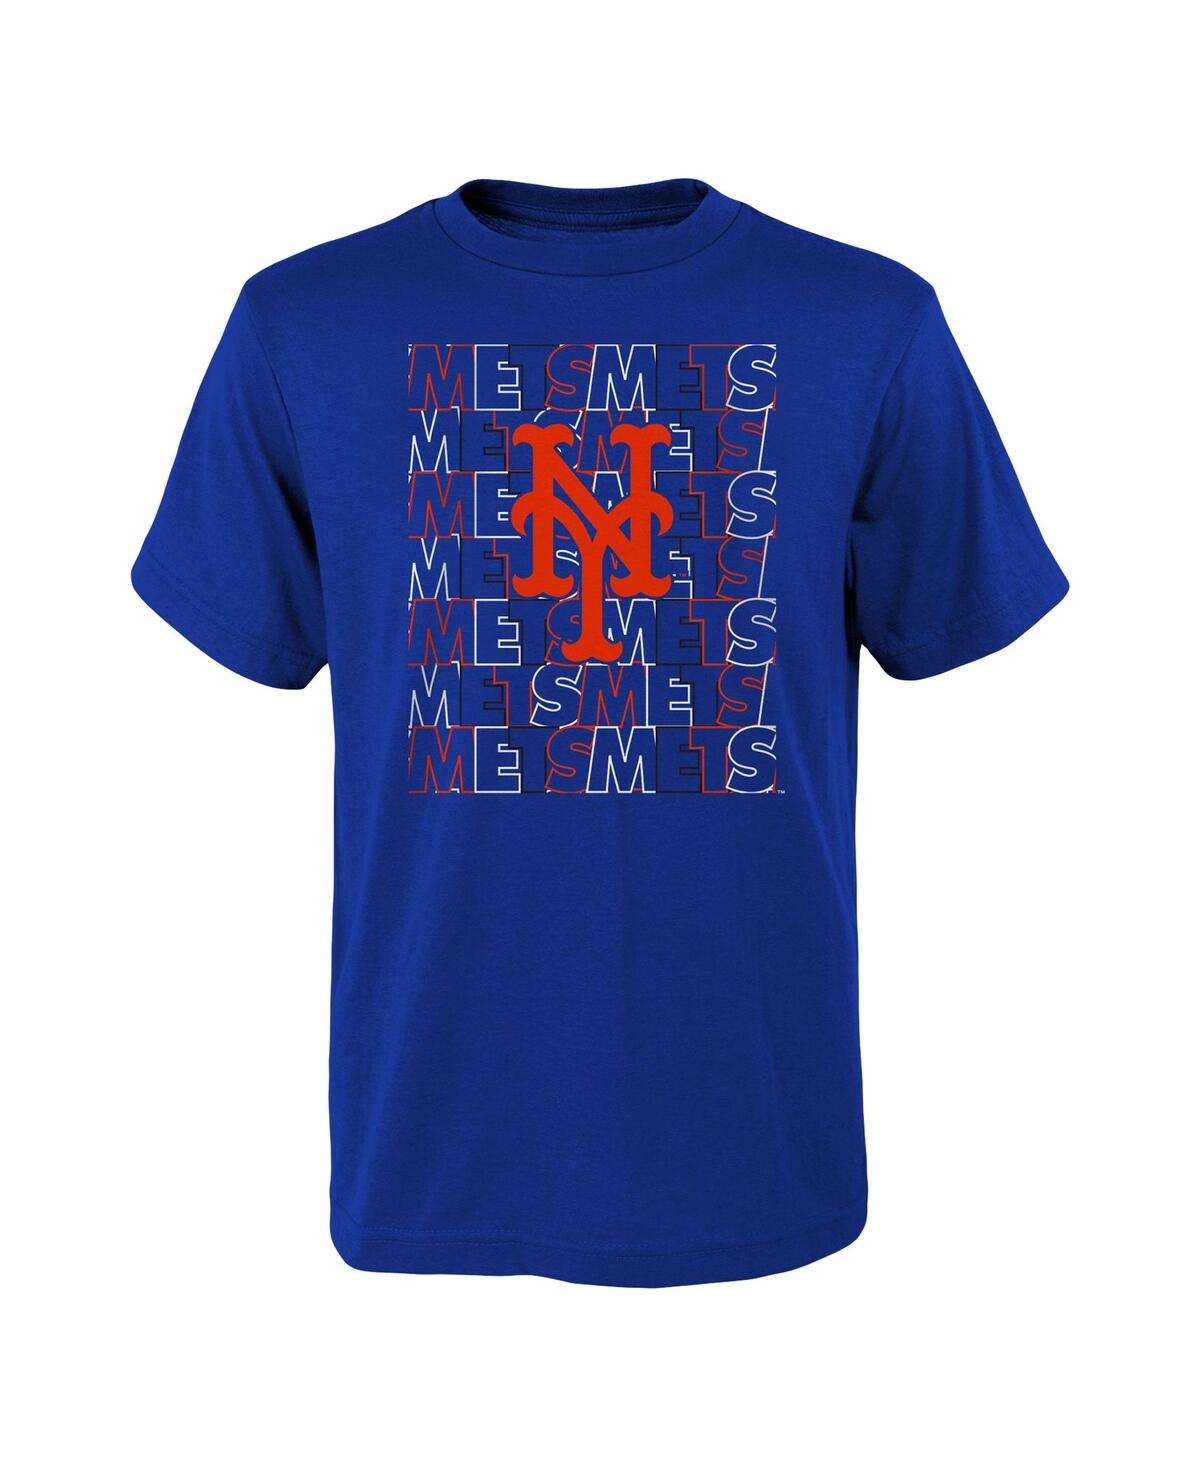 Outerstuff Kids' Big Boys And Girls Royal New York Mets Letterman T-shirt